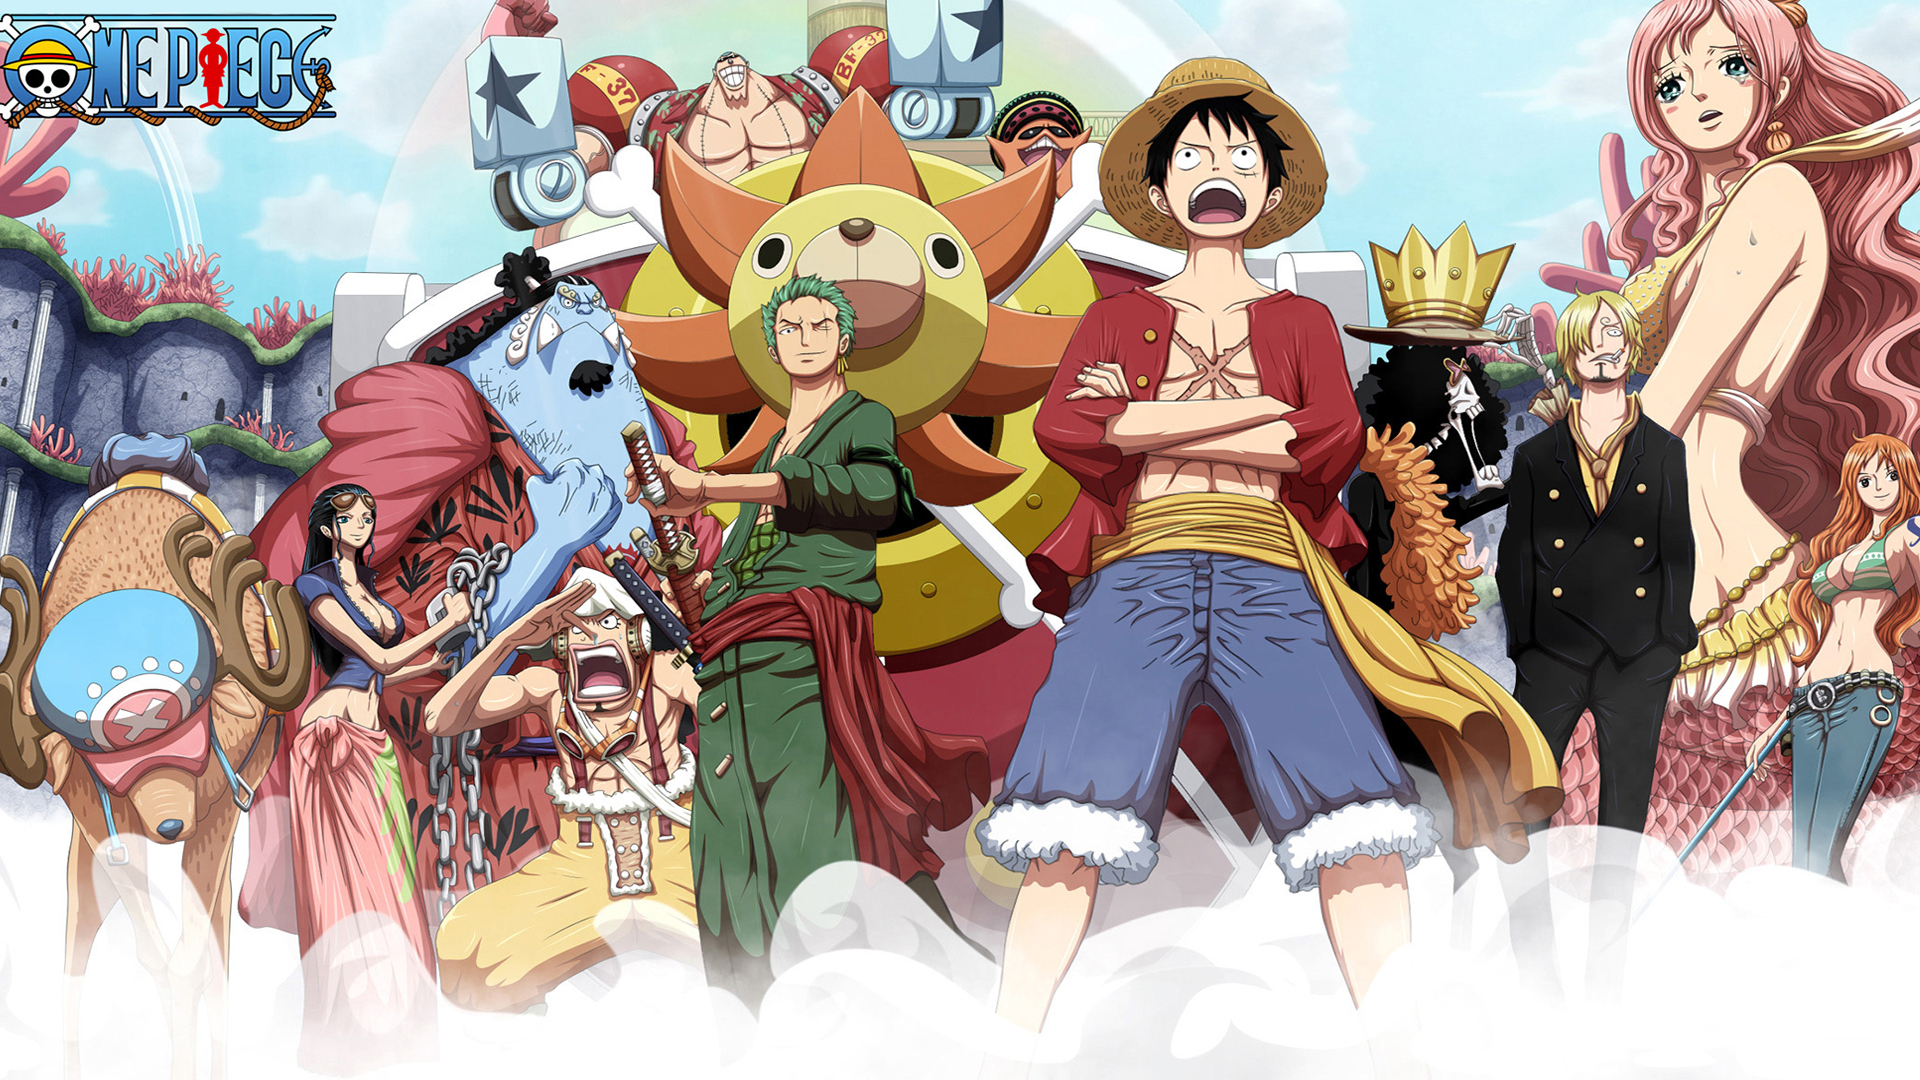 One piece poster Art - ID: 79532